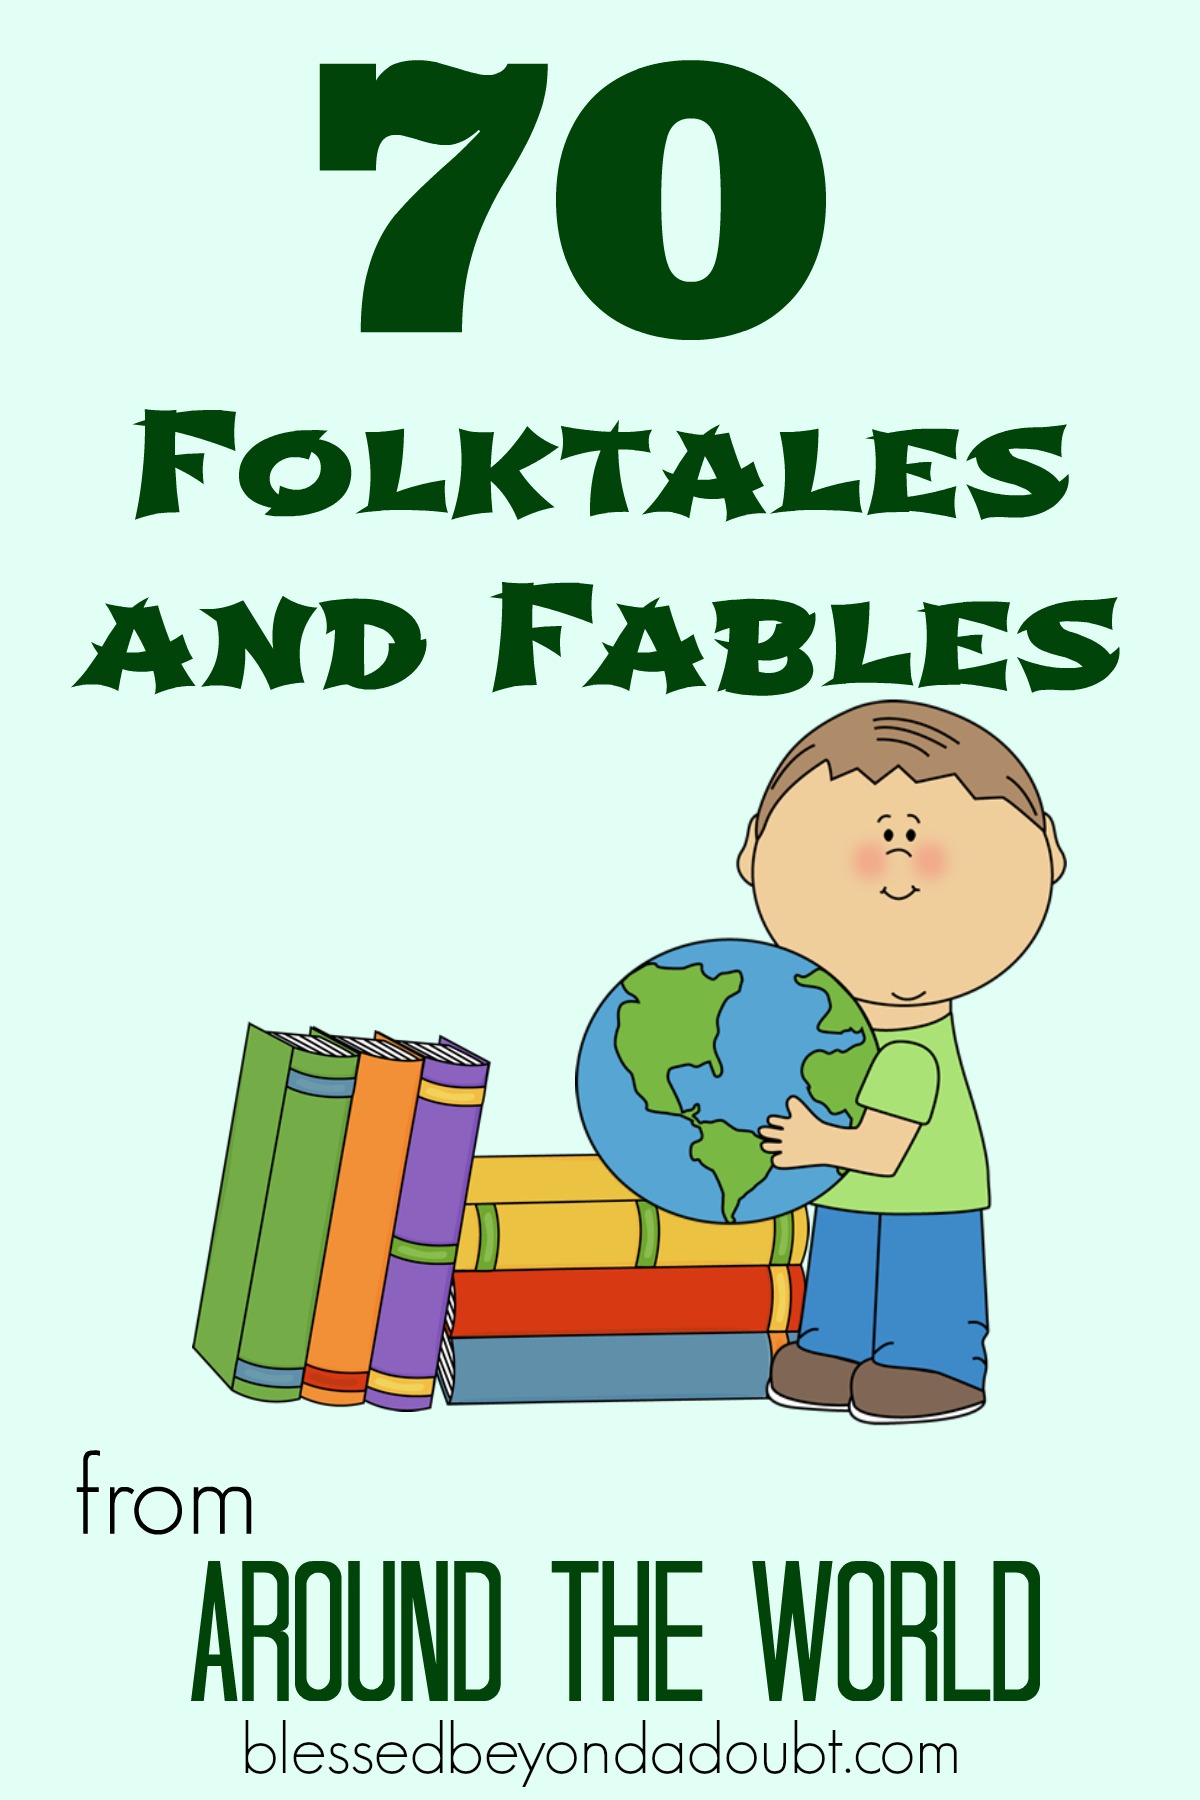 70 Best Children's Fables & Folktales From Around the World: Cleverly crafted fables, illustrated folktales, and mesmerizing myths gathered from around the world.